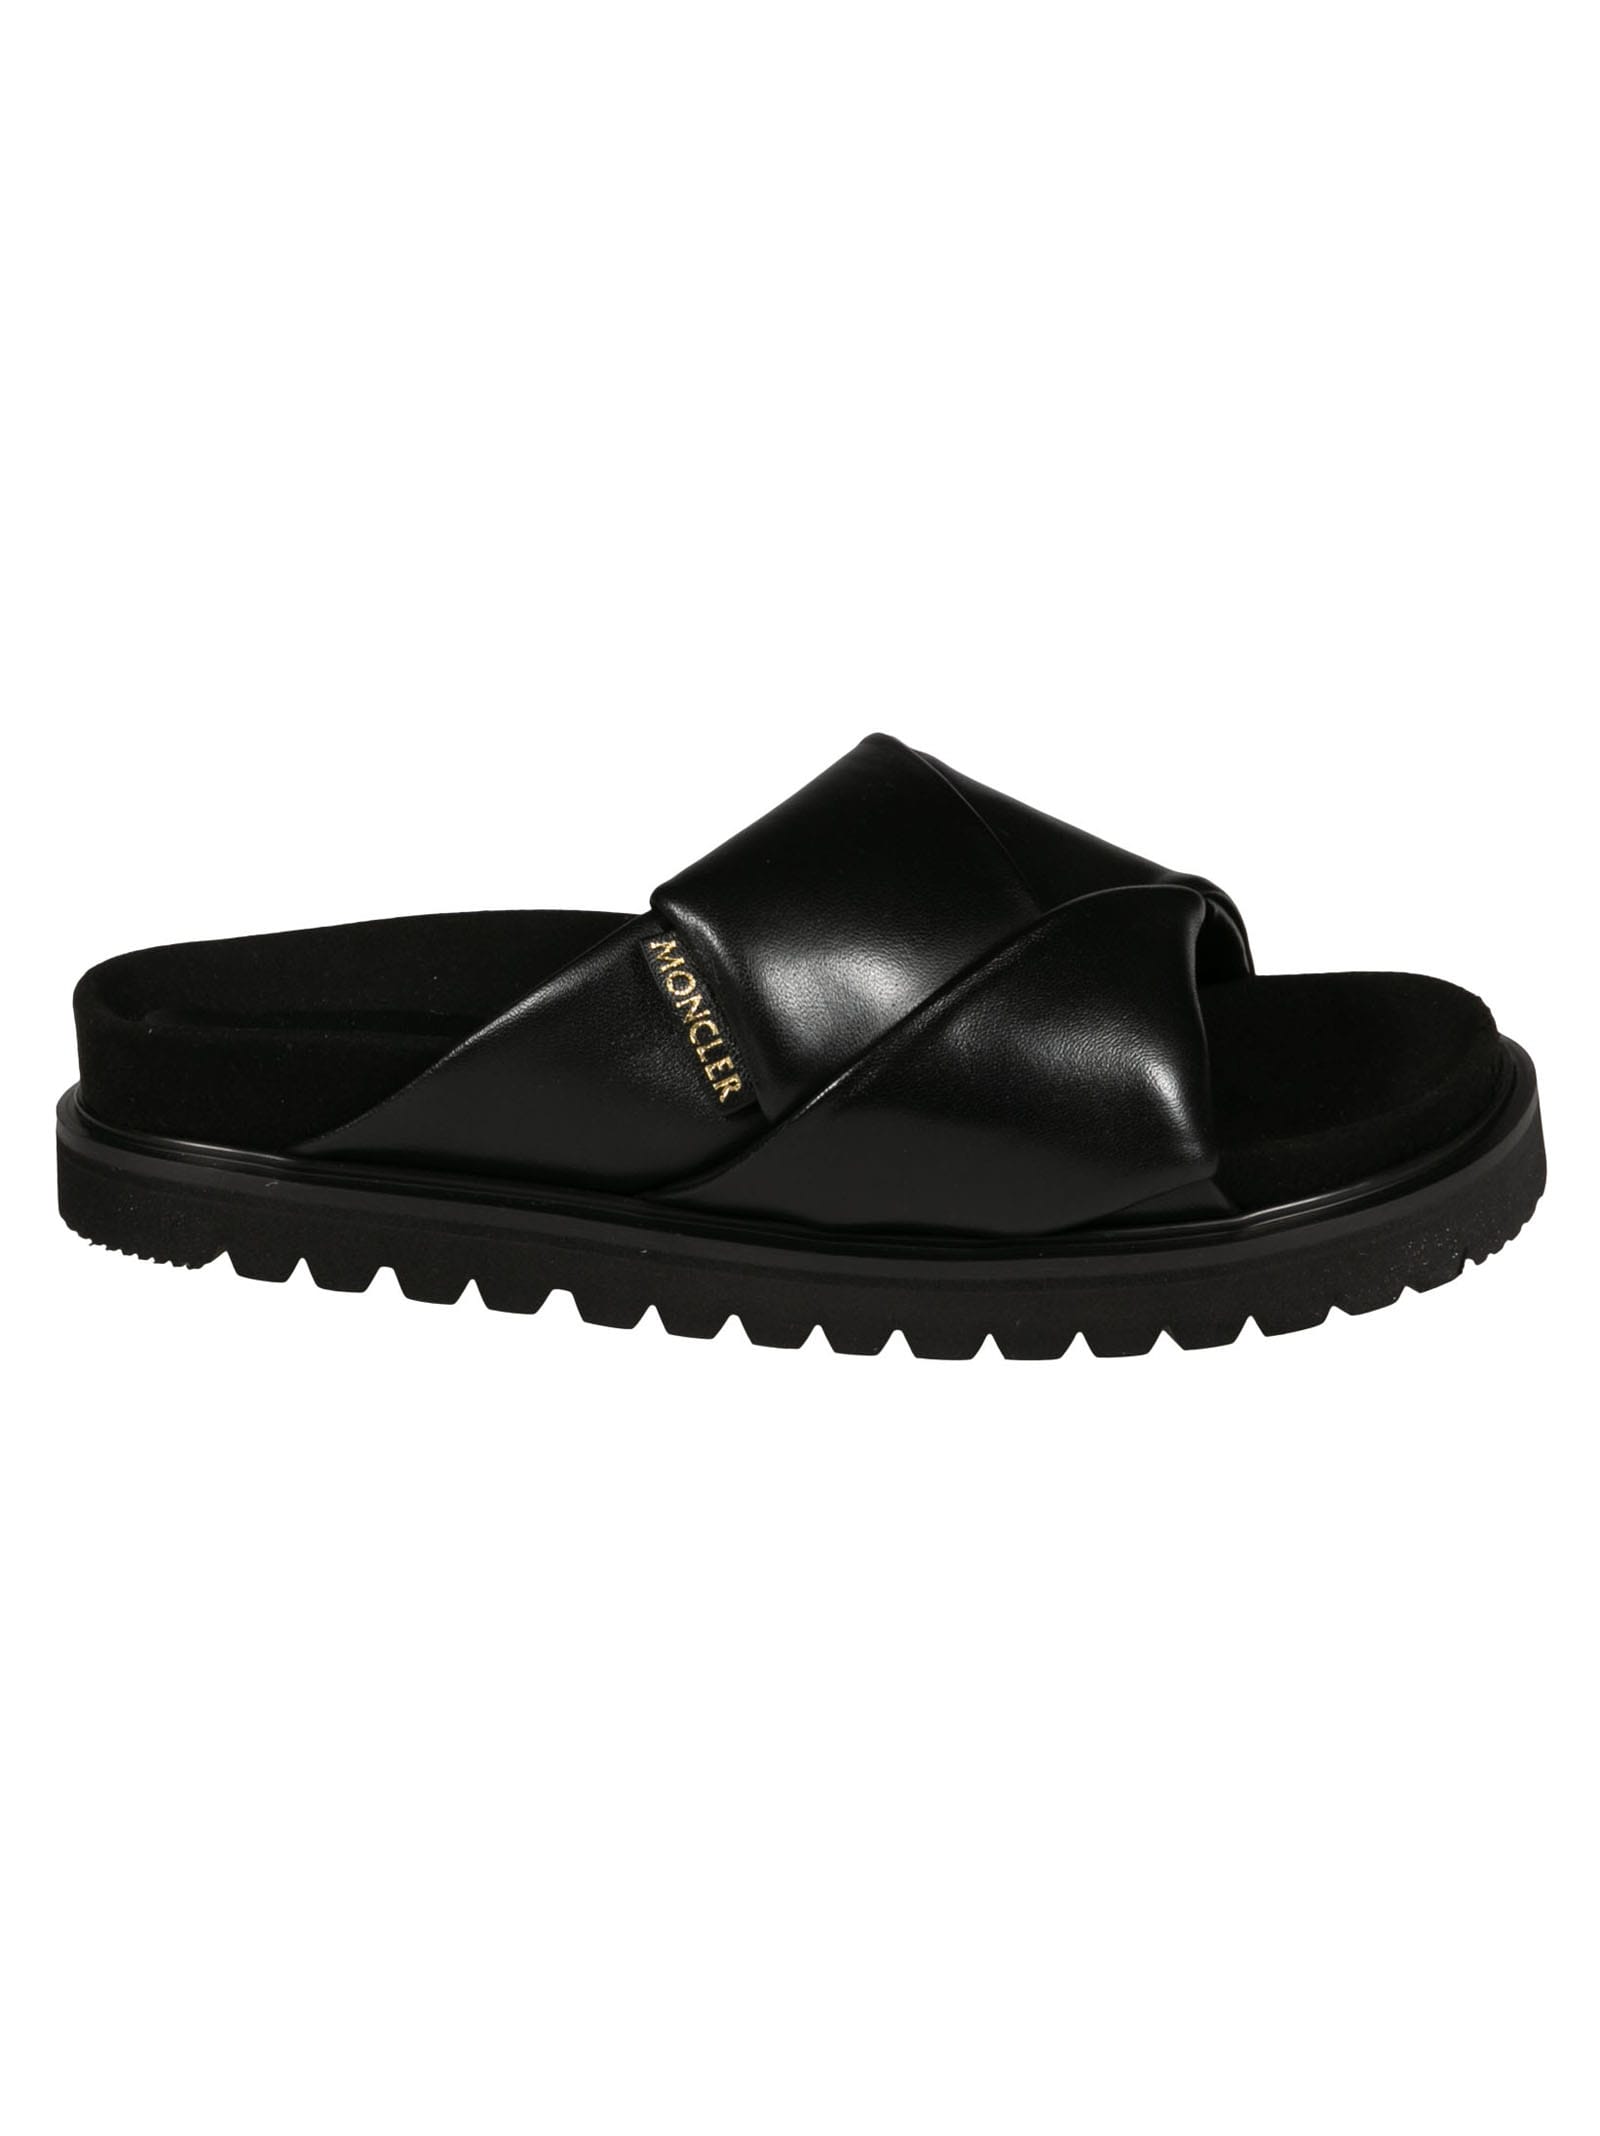 Buy Moncler Fantine Cross Strap Sliders online, shop Moncler shoes with free shipping